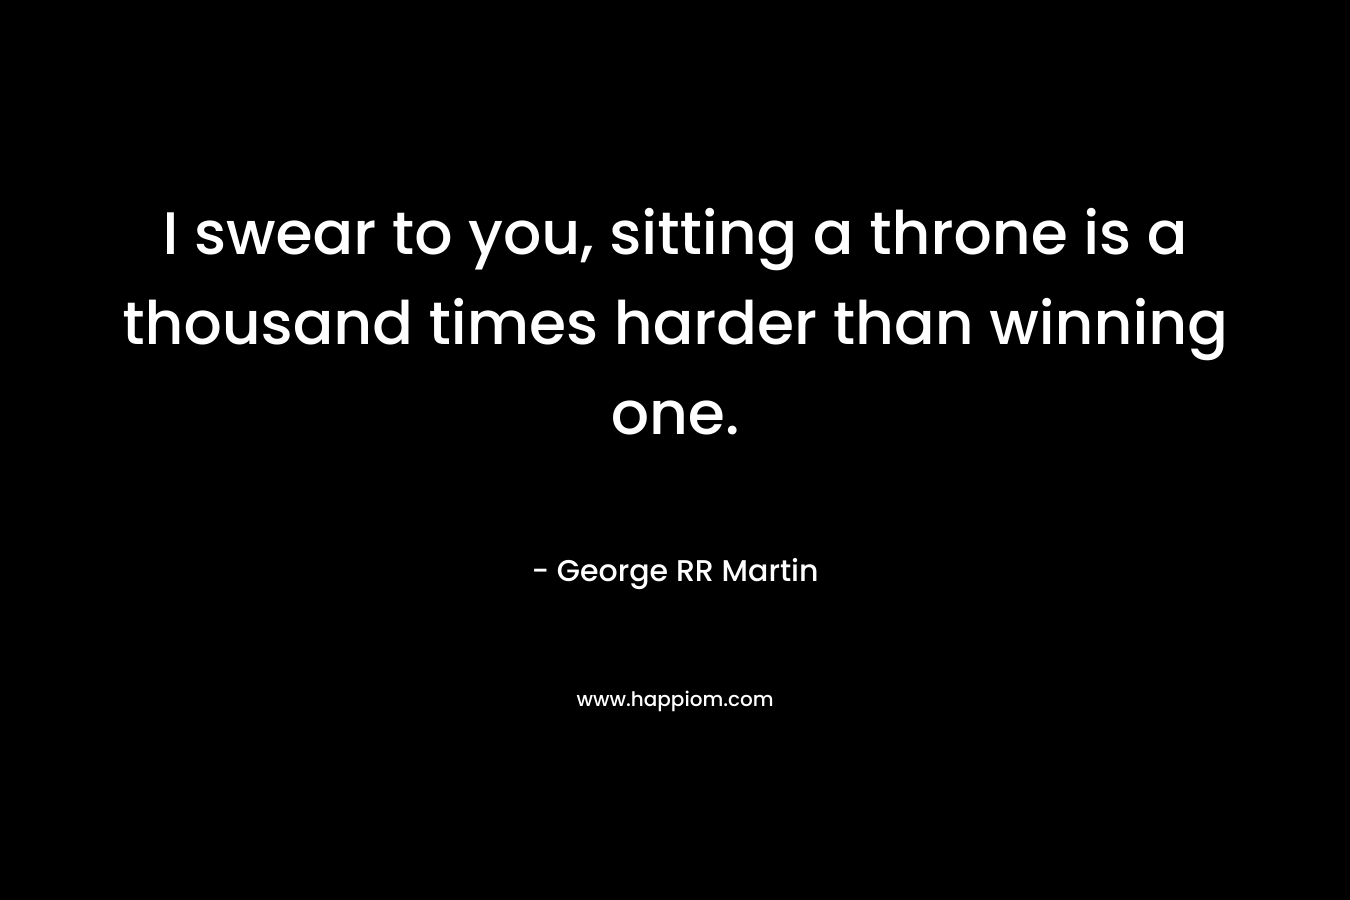 I swear to you, sitting a throne is a thousand times harder than winning one. – George RR Martin